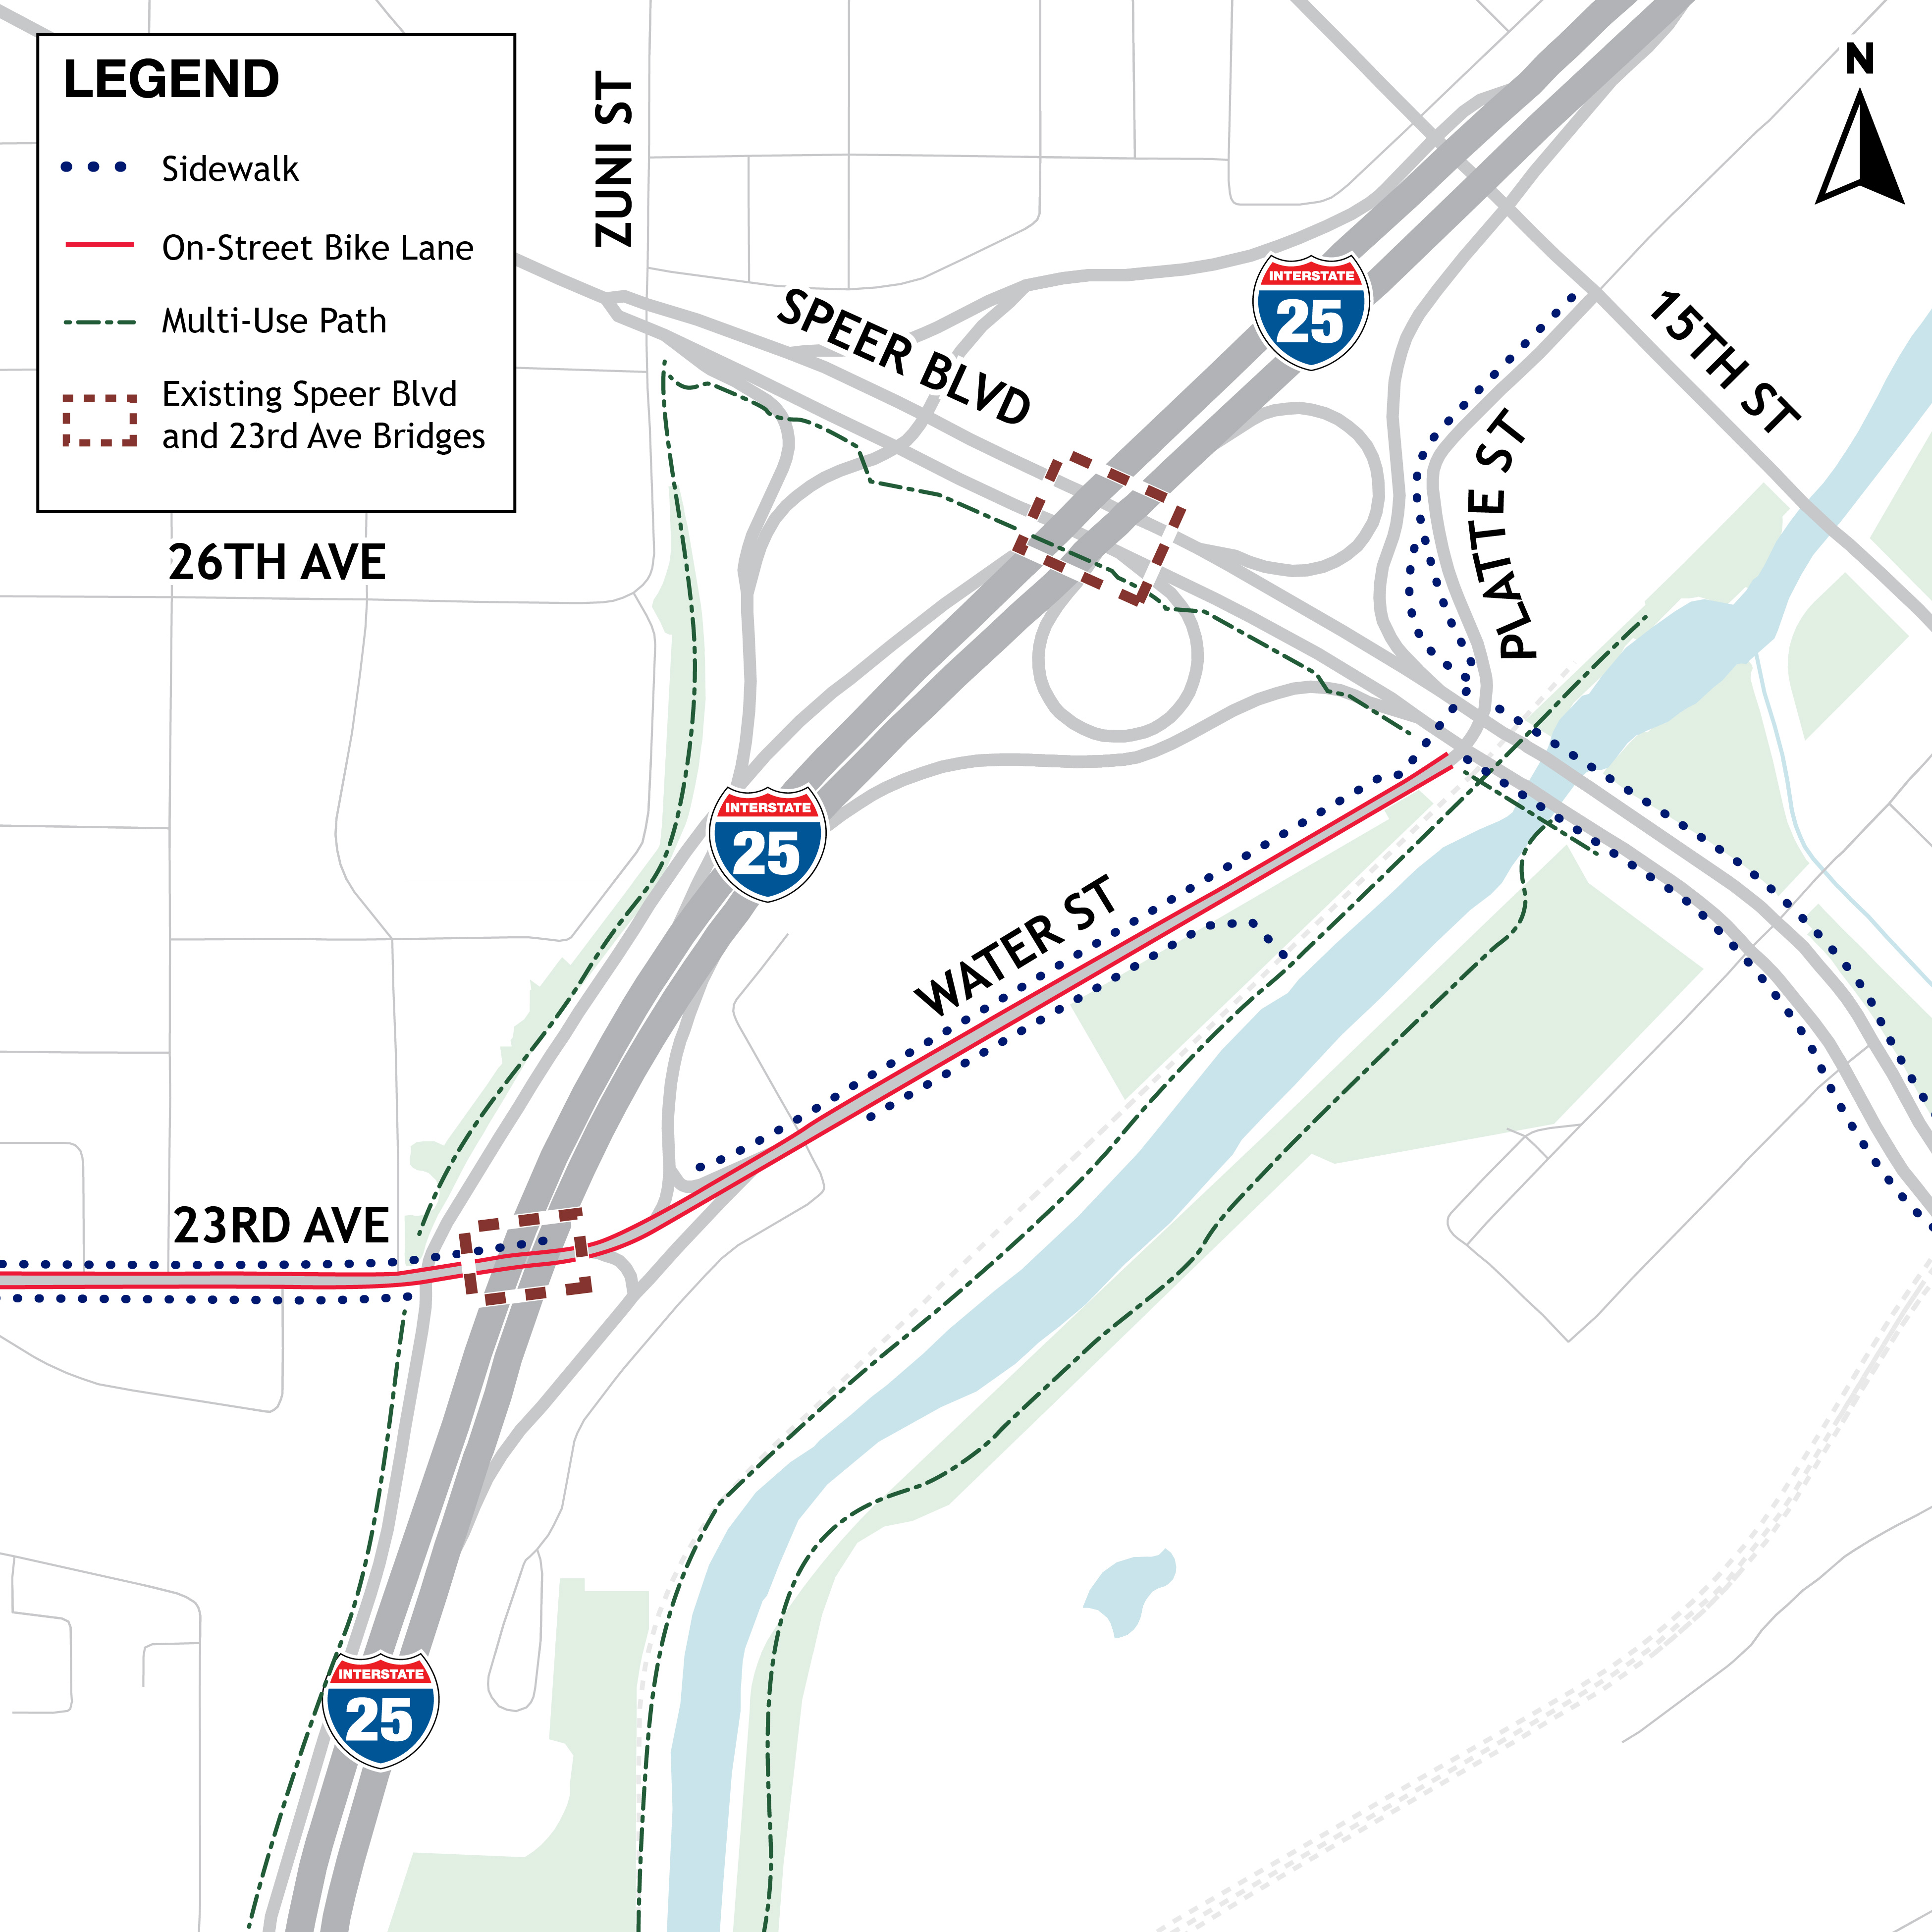 Map of existing Bike and Pedestrian facilities on Speer Blvd.jpg detail image